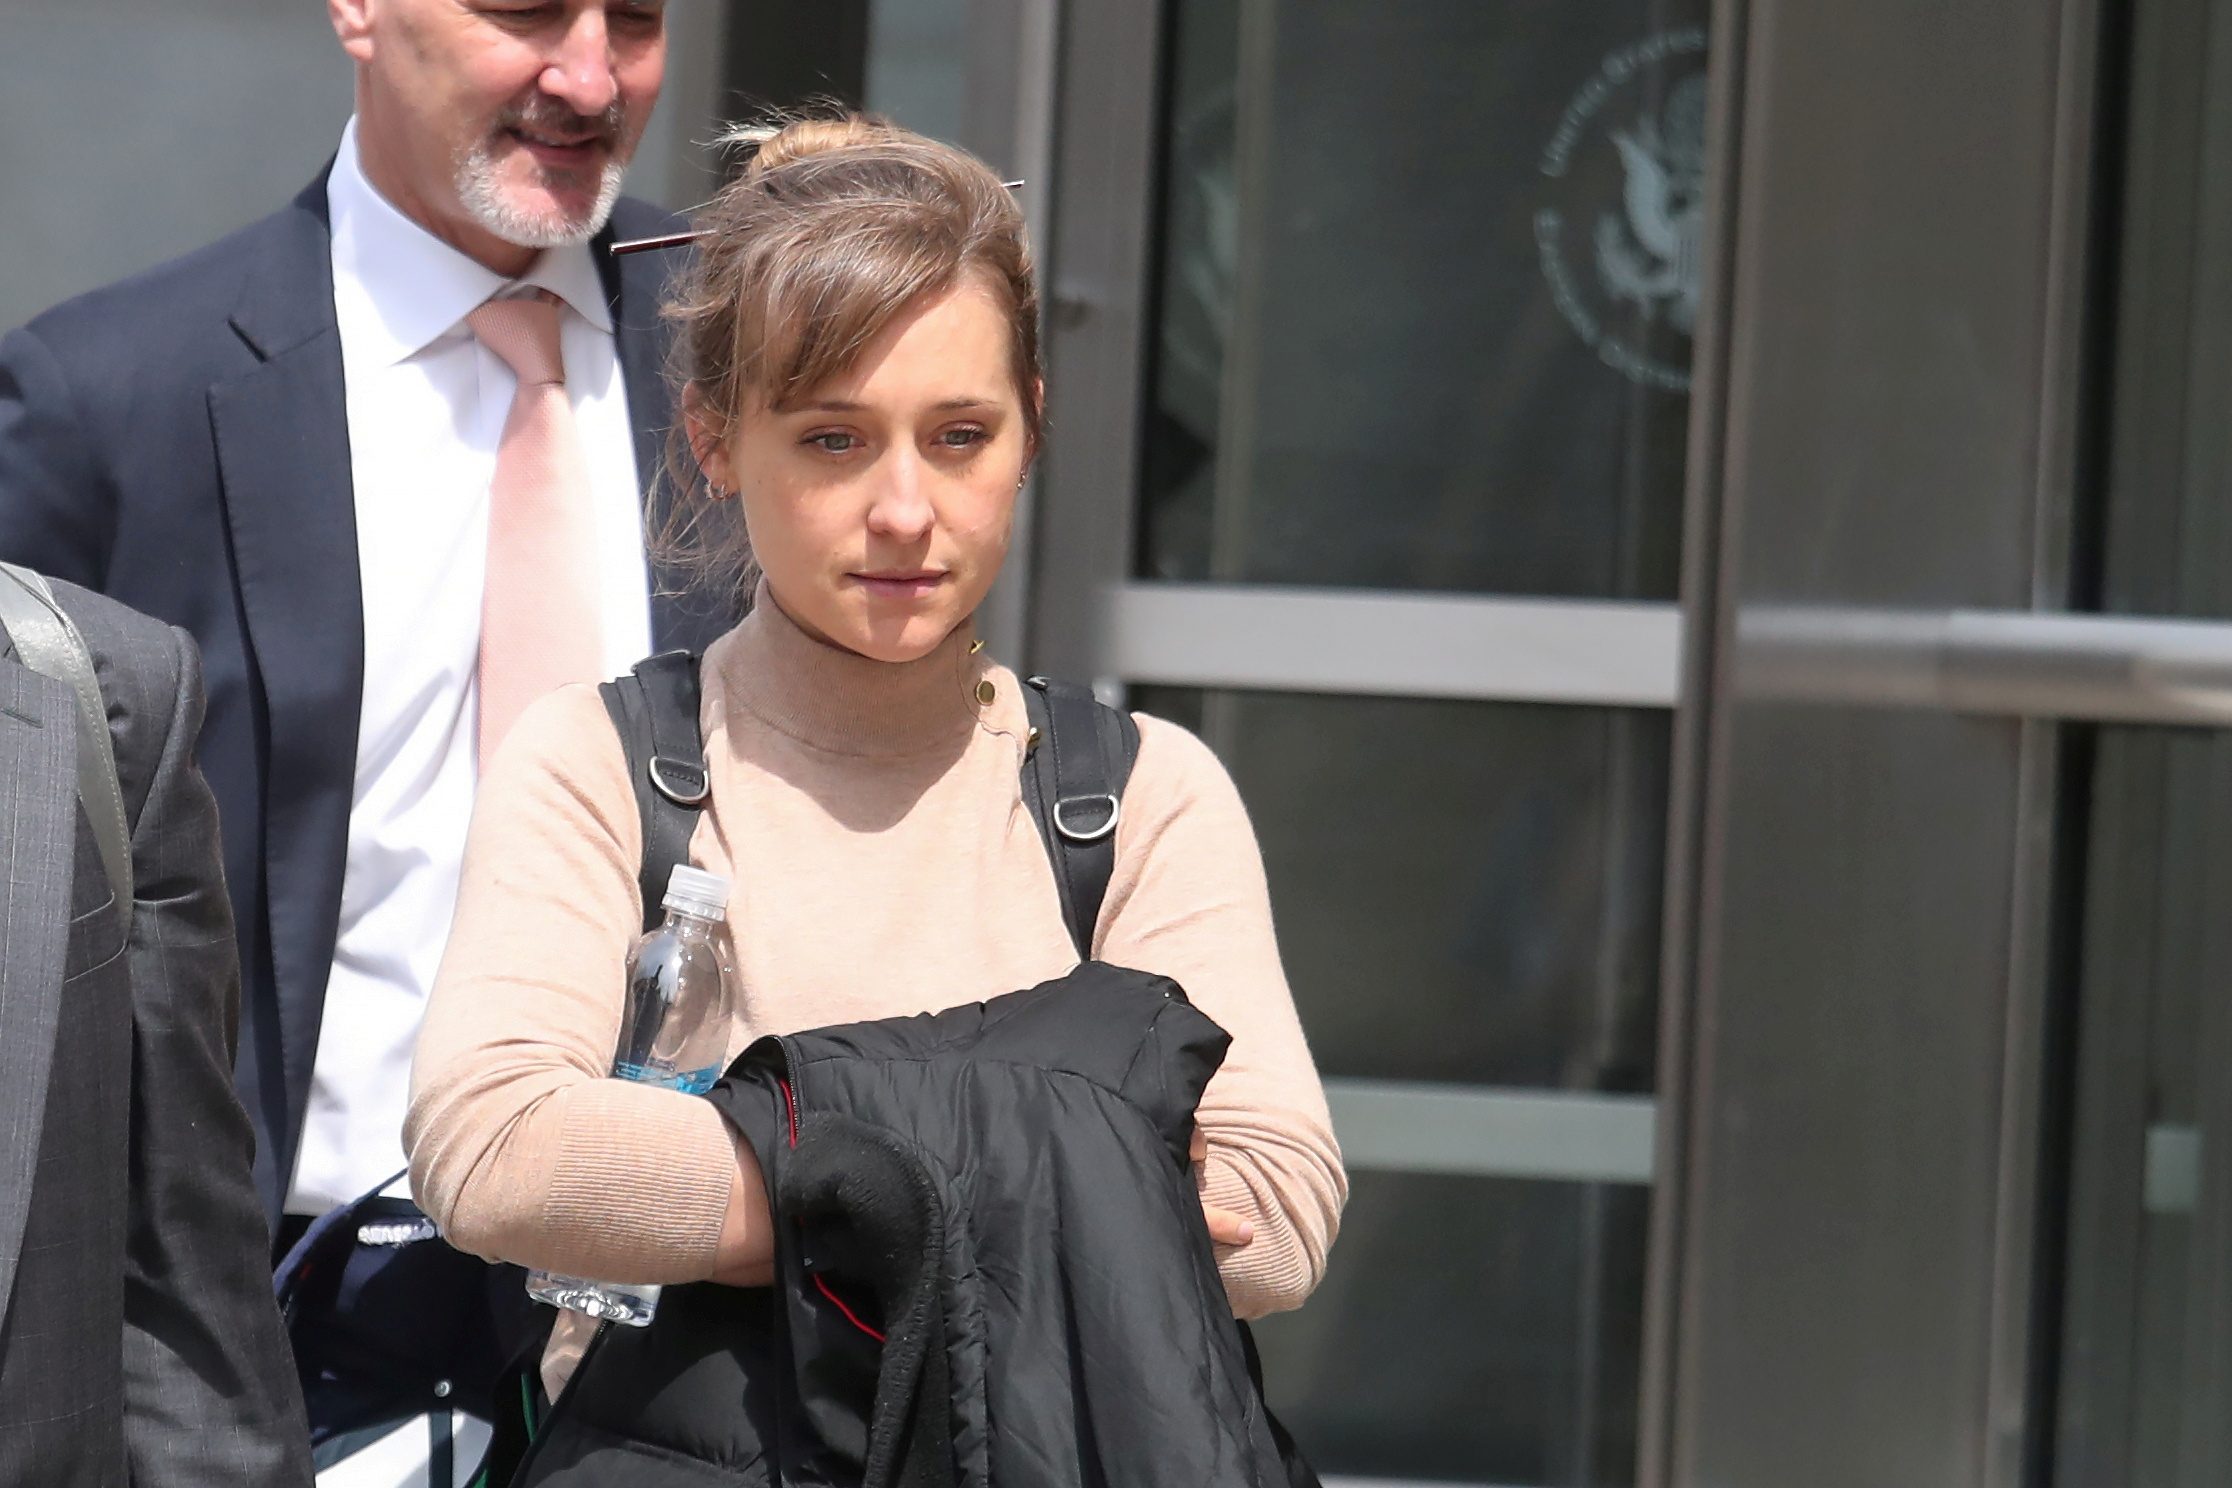 Actress Allison Mack gets 3 years prison for NXIVM sex cult